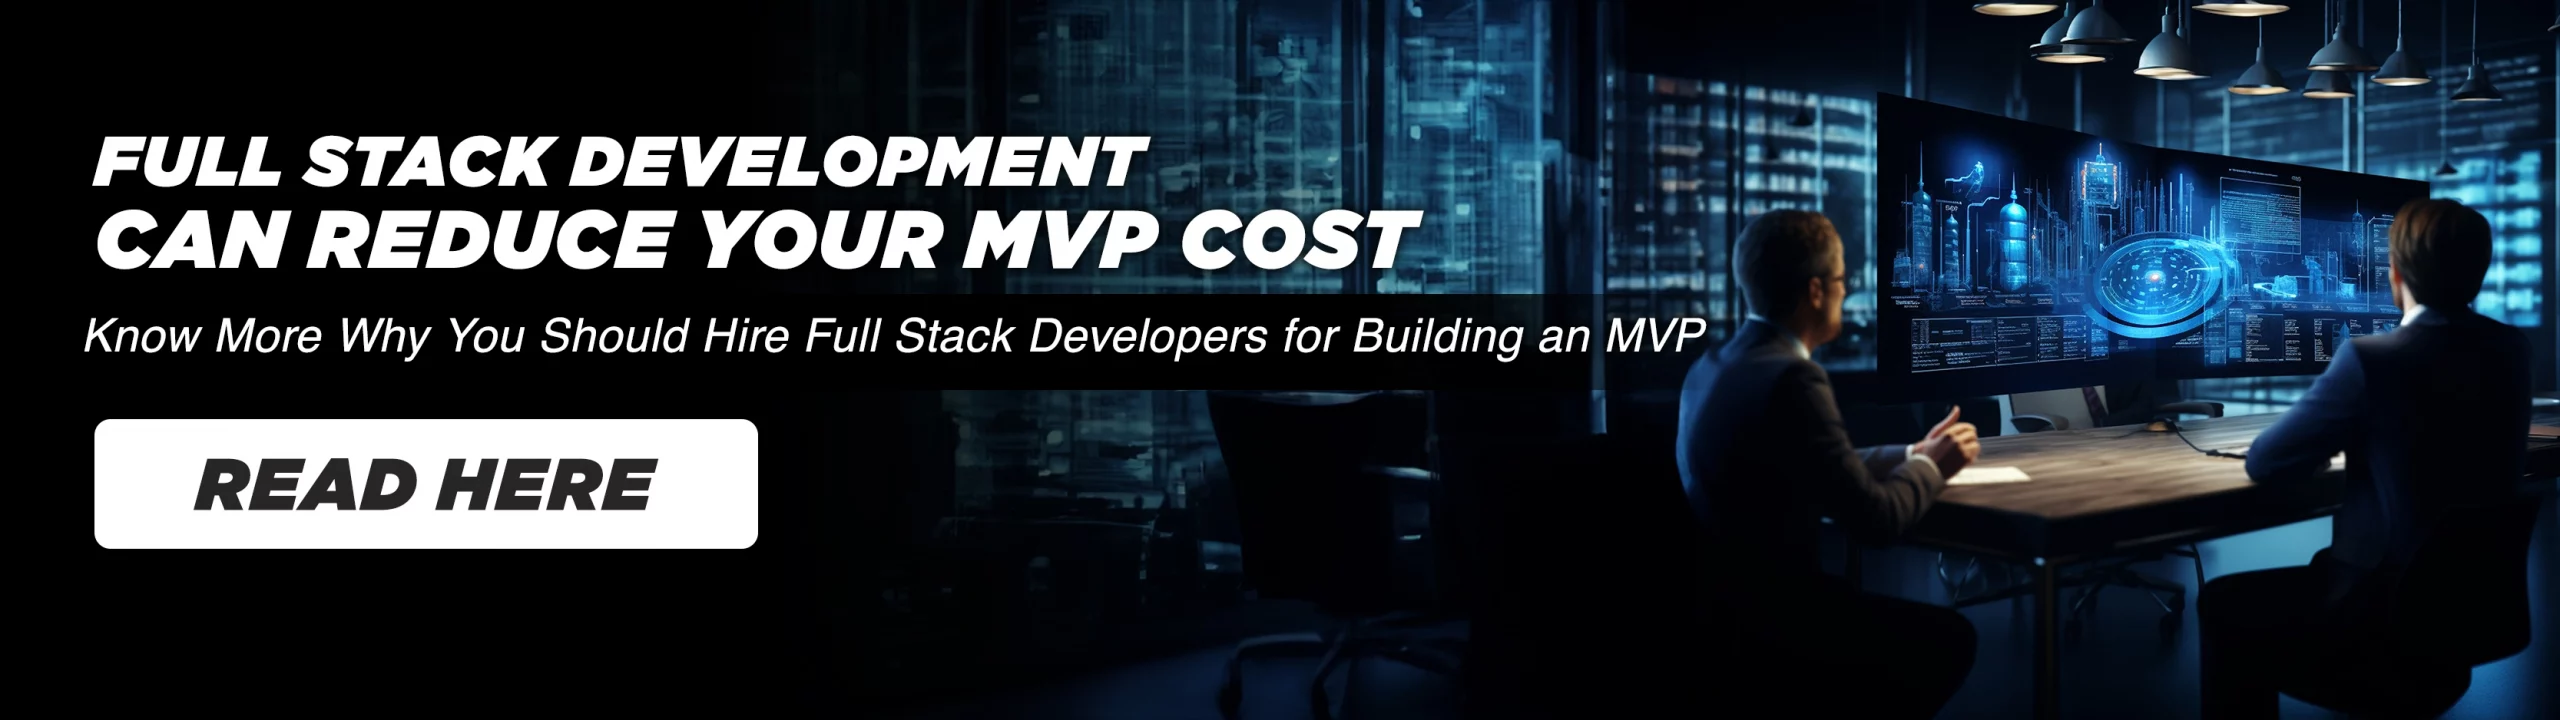 Full Stack Development Can Reduce Your MVP Cost